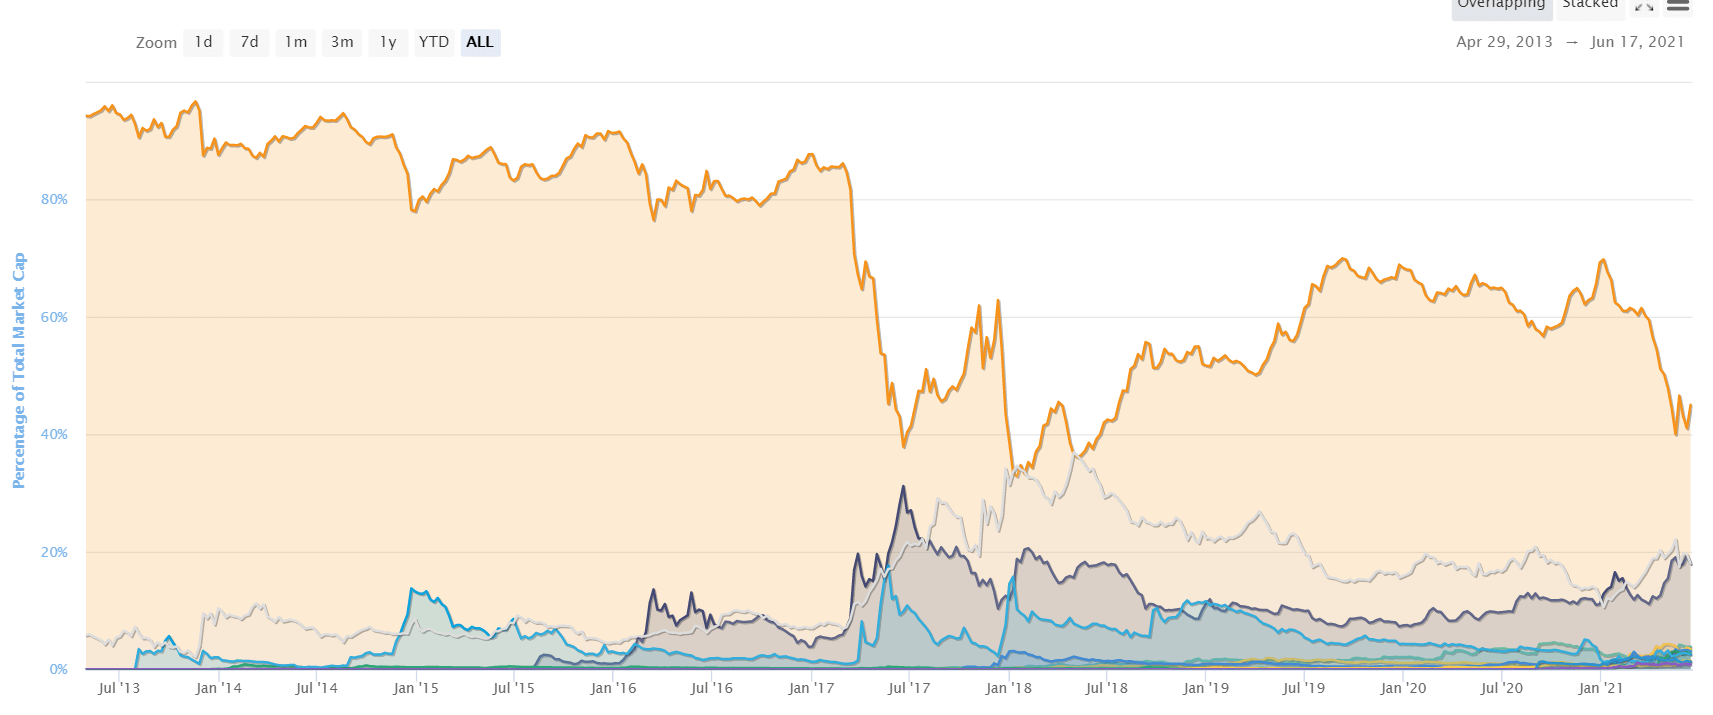 You can soon bet on BTC’s dominance against other cryptos